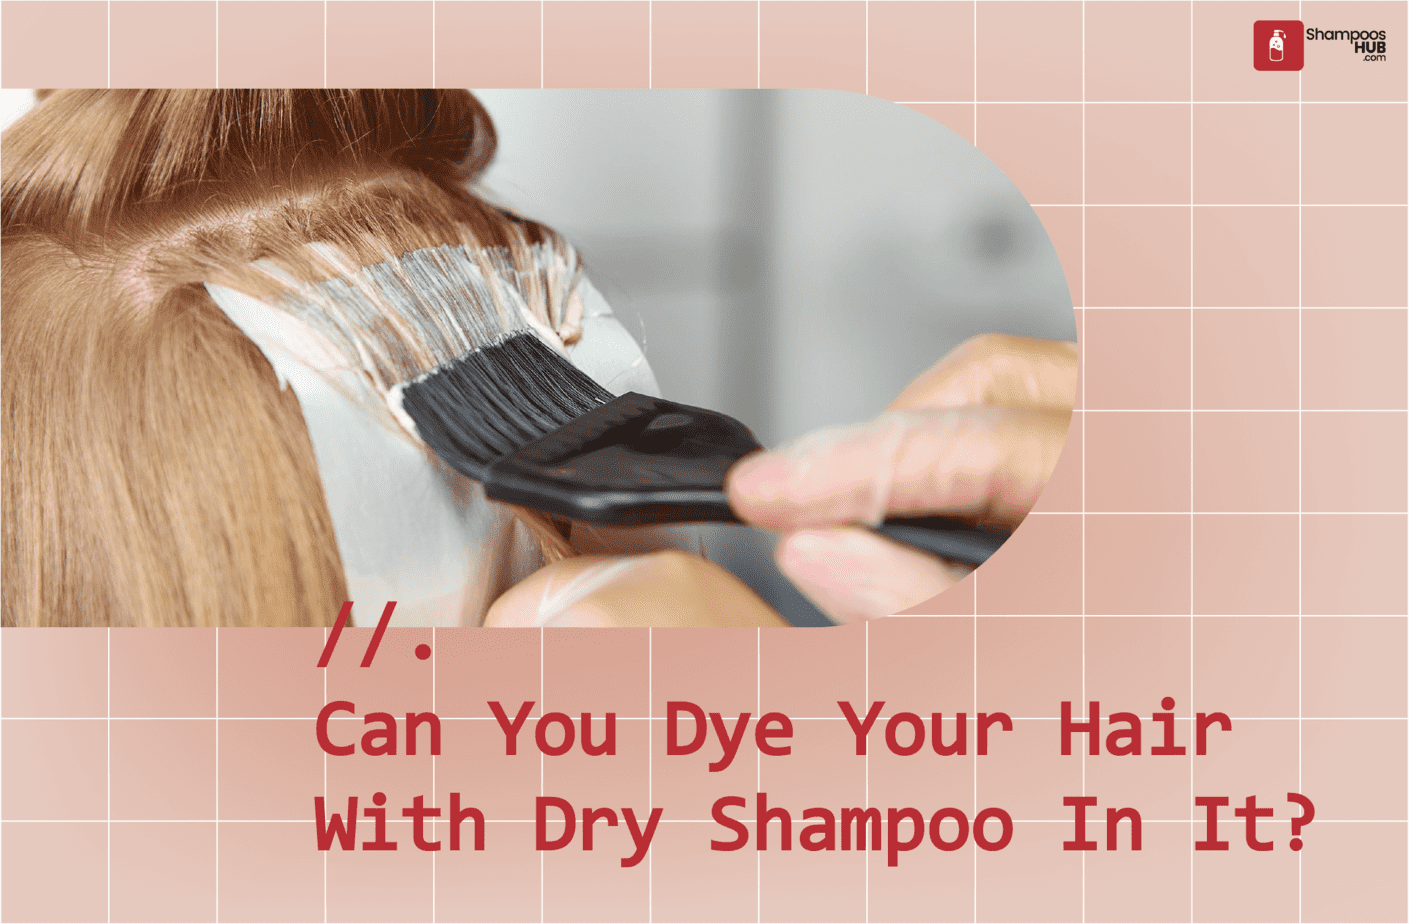 Can You Dye Your Hair With Dry Shampoo In It?